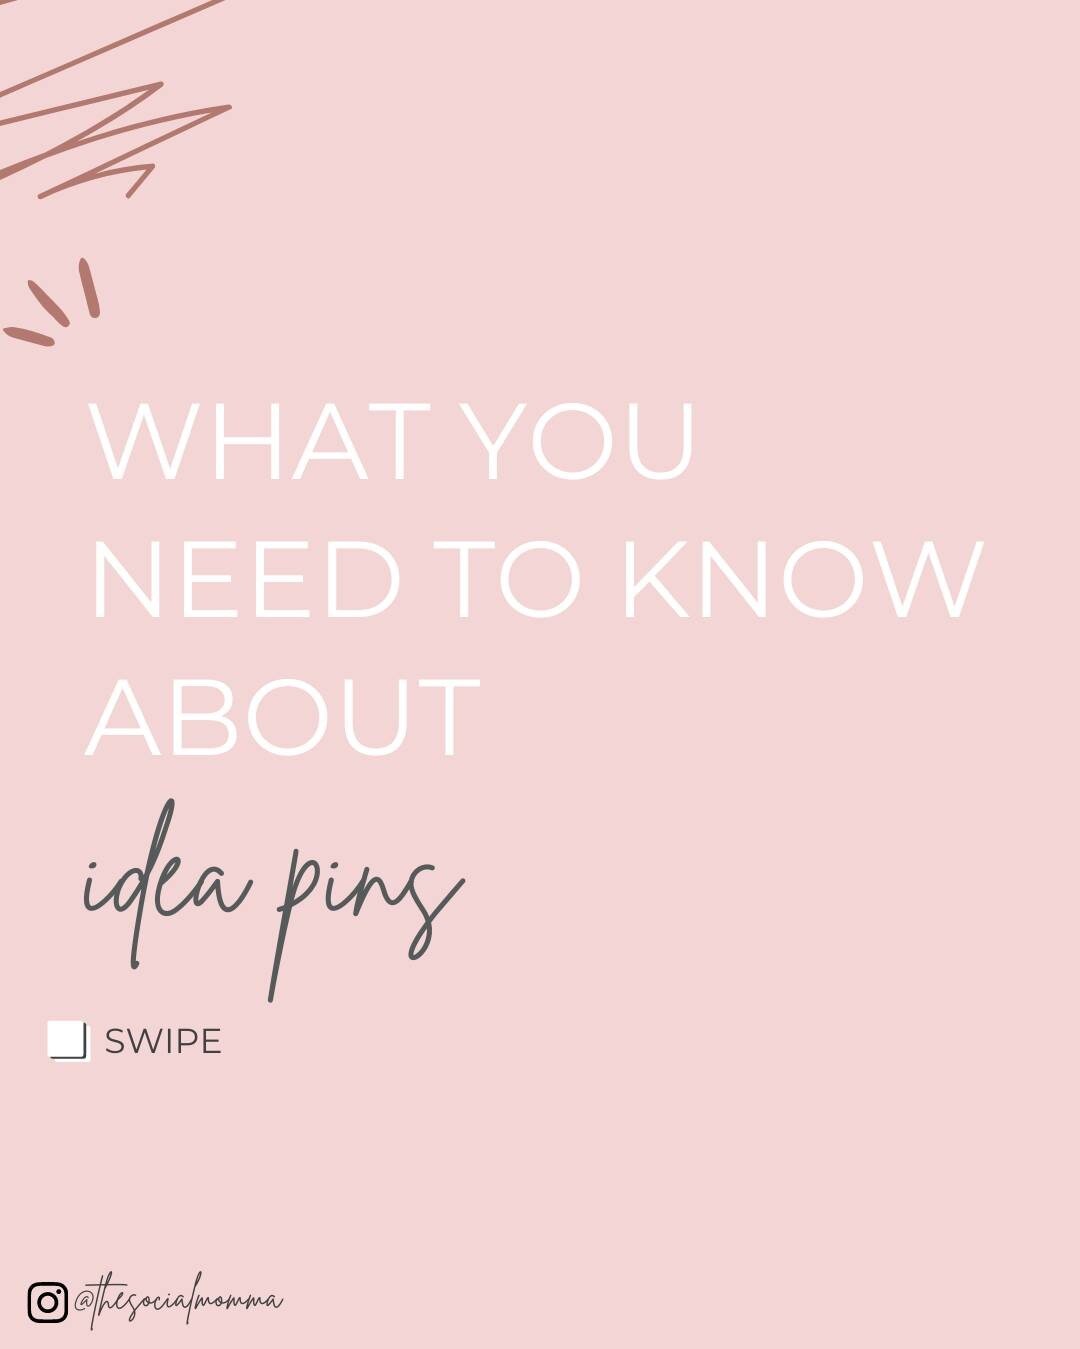 Secrets out, idea pins are in!

I'll keep this caption short and sweet. If you have access to idea pins - add it to your pinning strategy asap! It can help your account more than you know! So if you have amazing carousels from the past, repurpose the